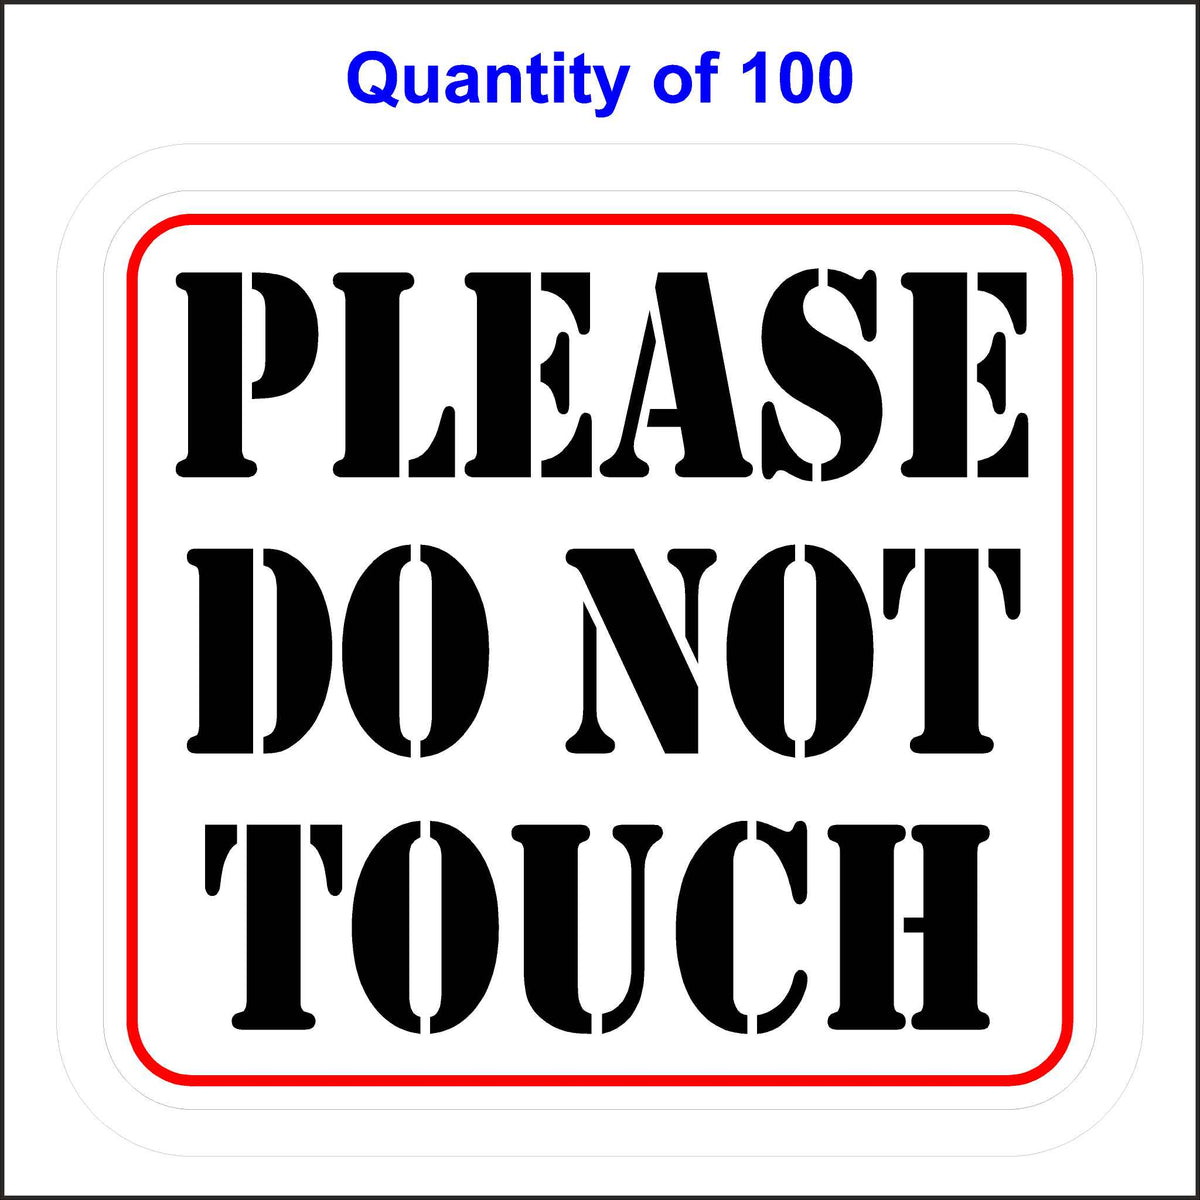 Please Do Not Touch Sticker With A White Background, Black Letters and Red Outline. 100 Quantity.